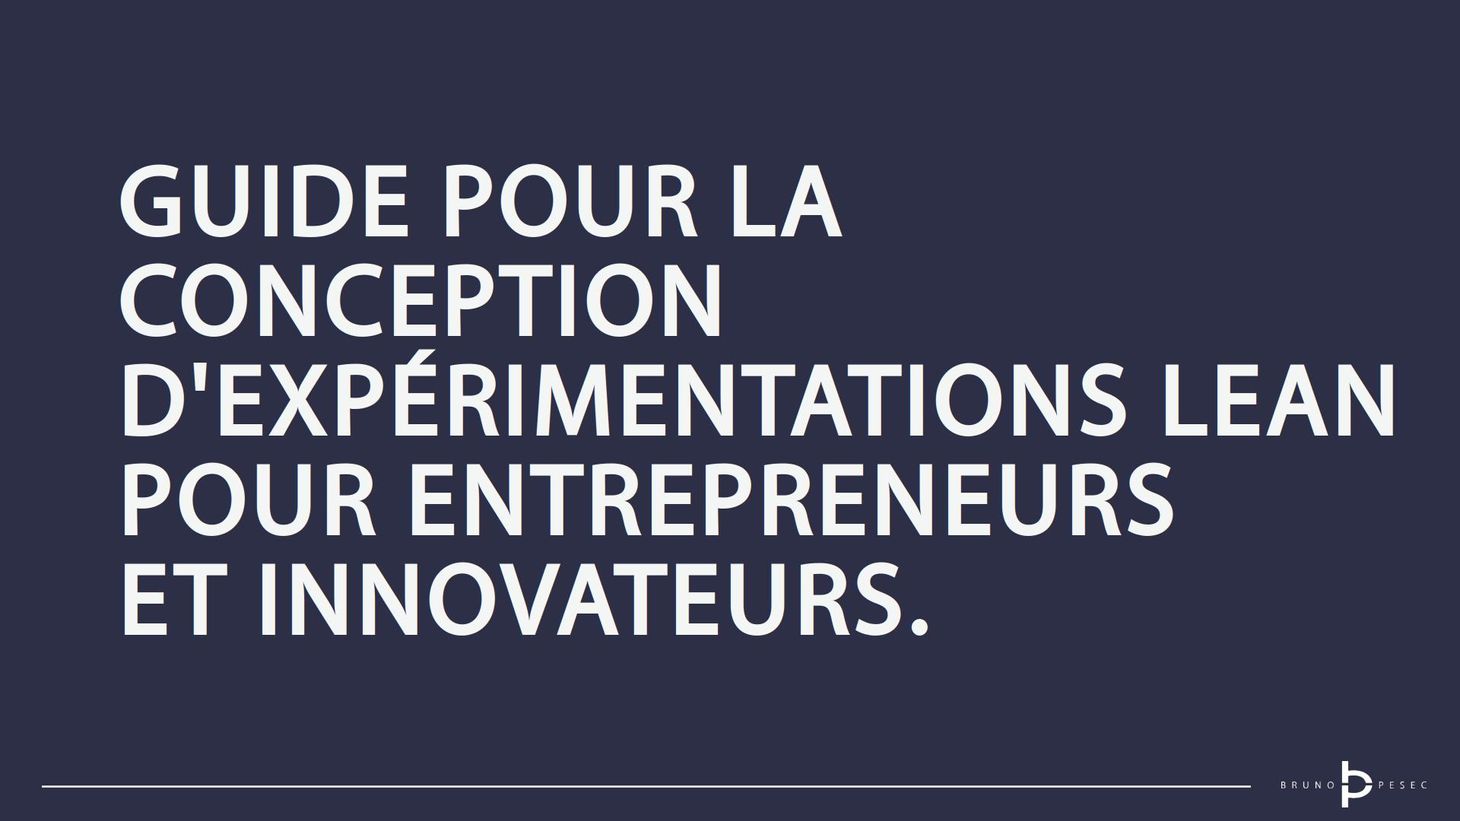 Lean Experimentation Guide now available in French